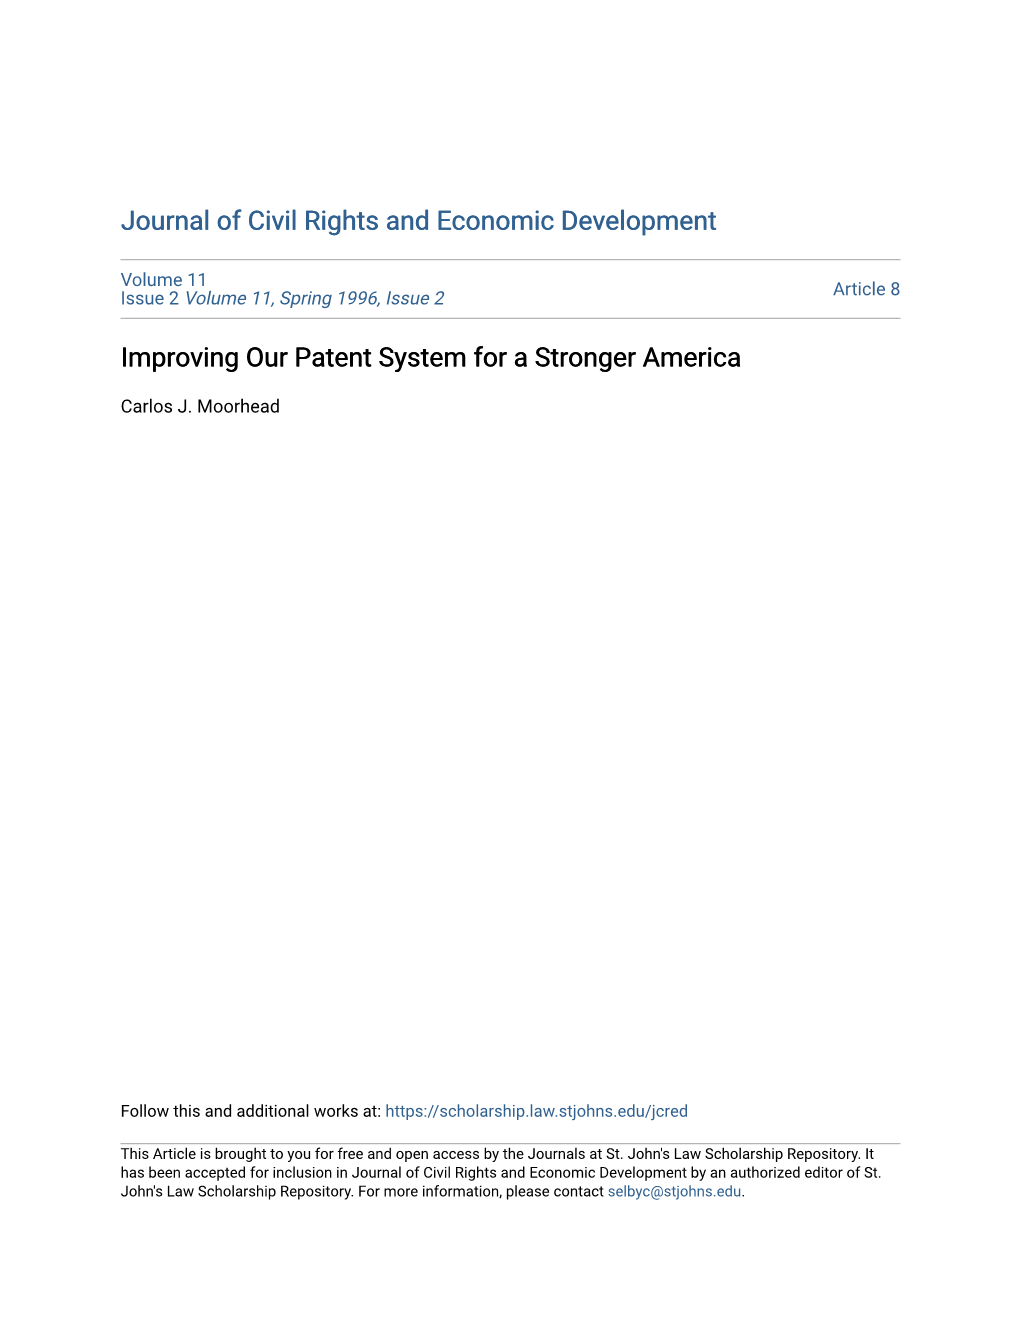 Improving Our Patent System for a Stronger America